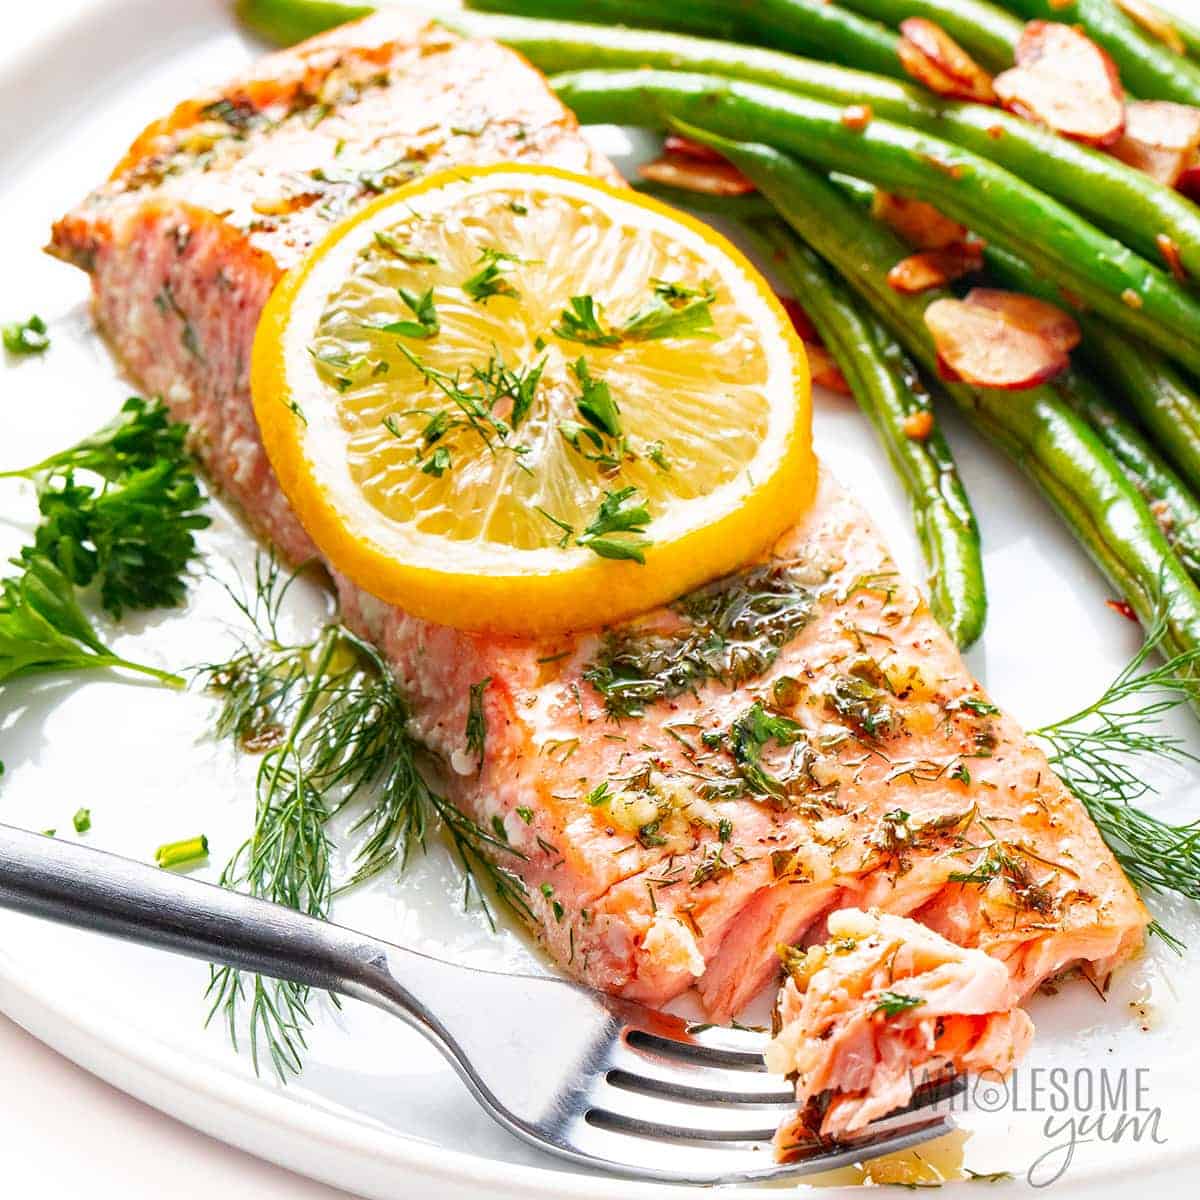 Baked salmon recipe up close on a plate.